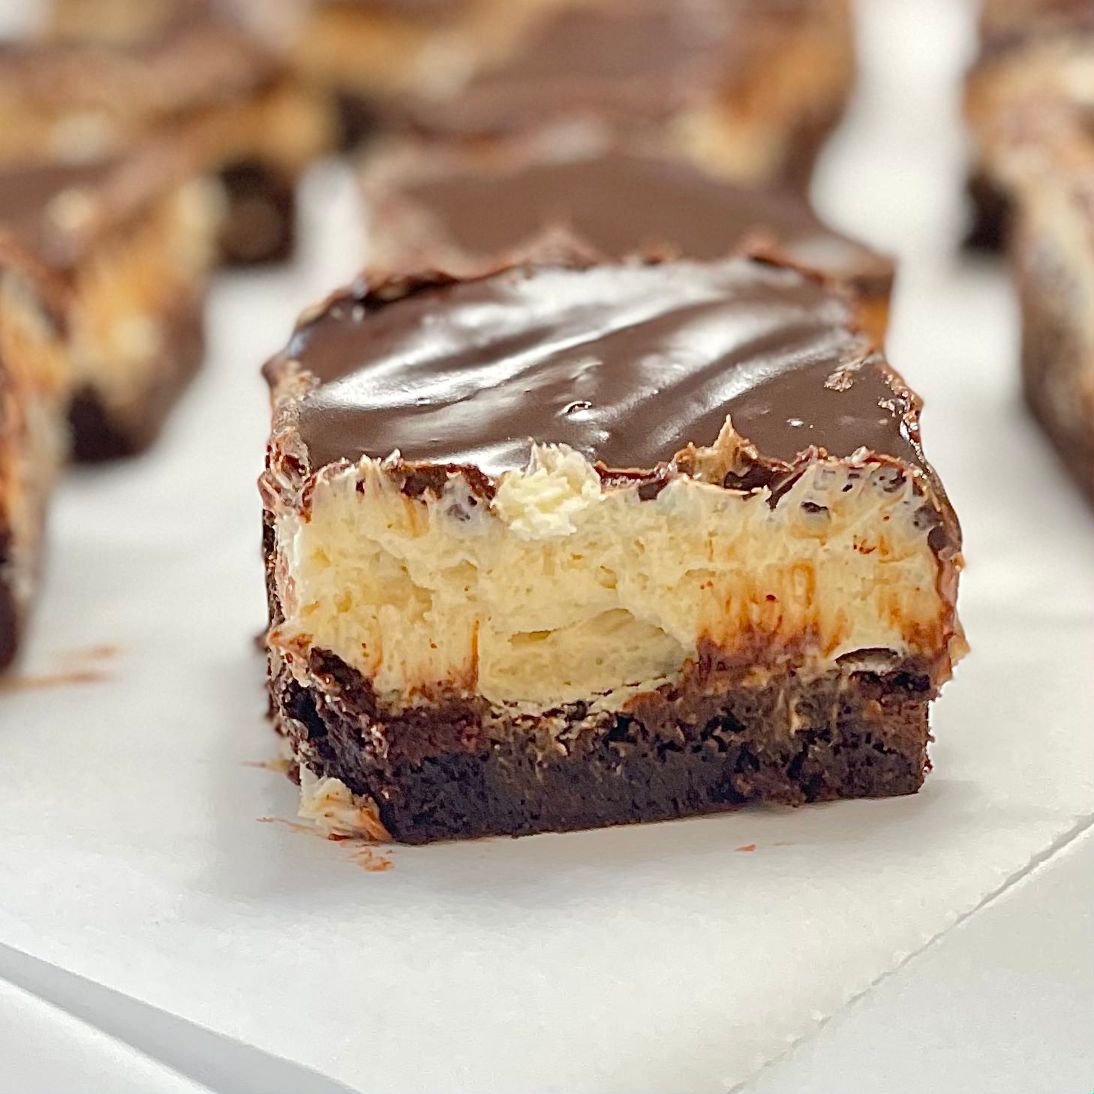 Irish Cream Brownies on a White Surface for Display